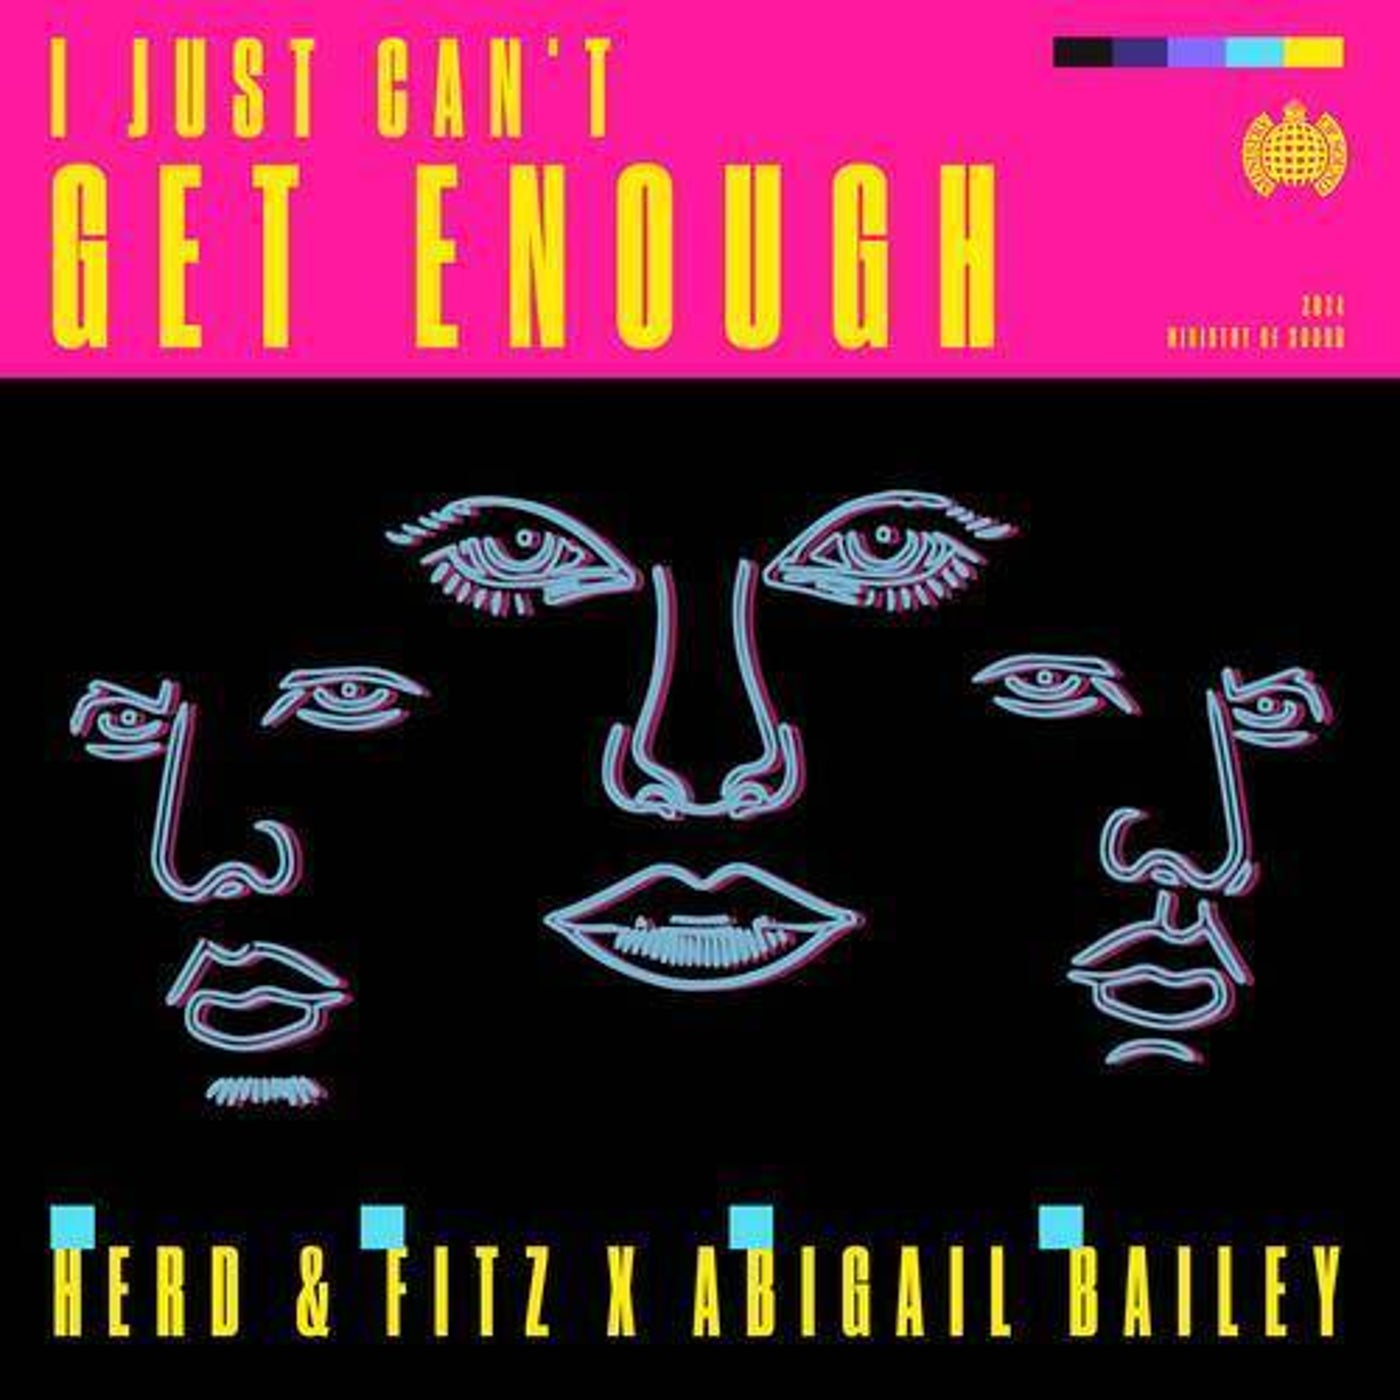 image cover: Jason Herd, Abigail Bailey, Jon Fitz, Herd & Fitz - I Just Can't Get Enough 2024 (Extended) on Ministry of Sound Recordings